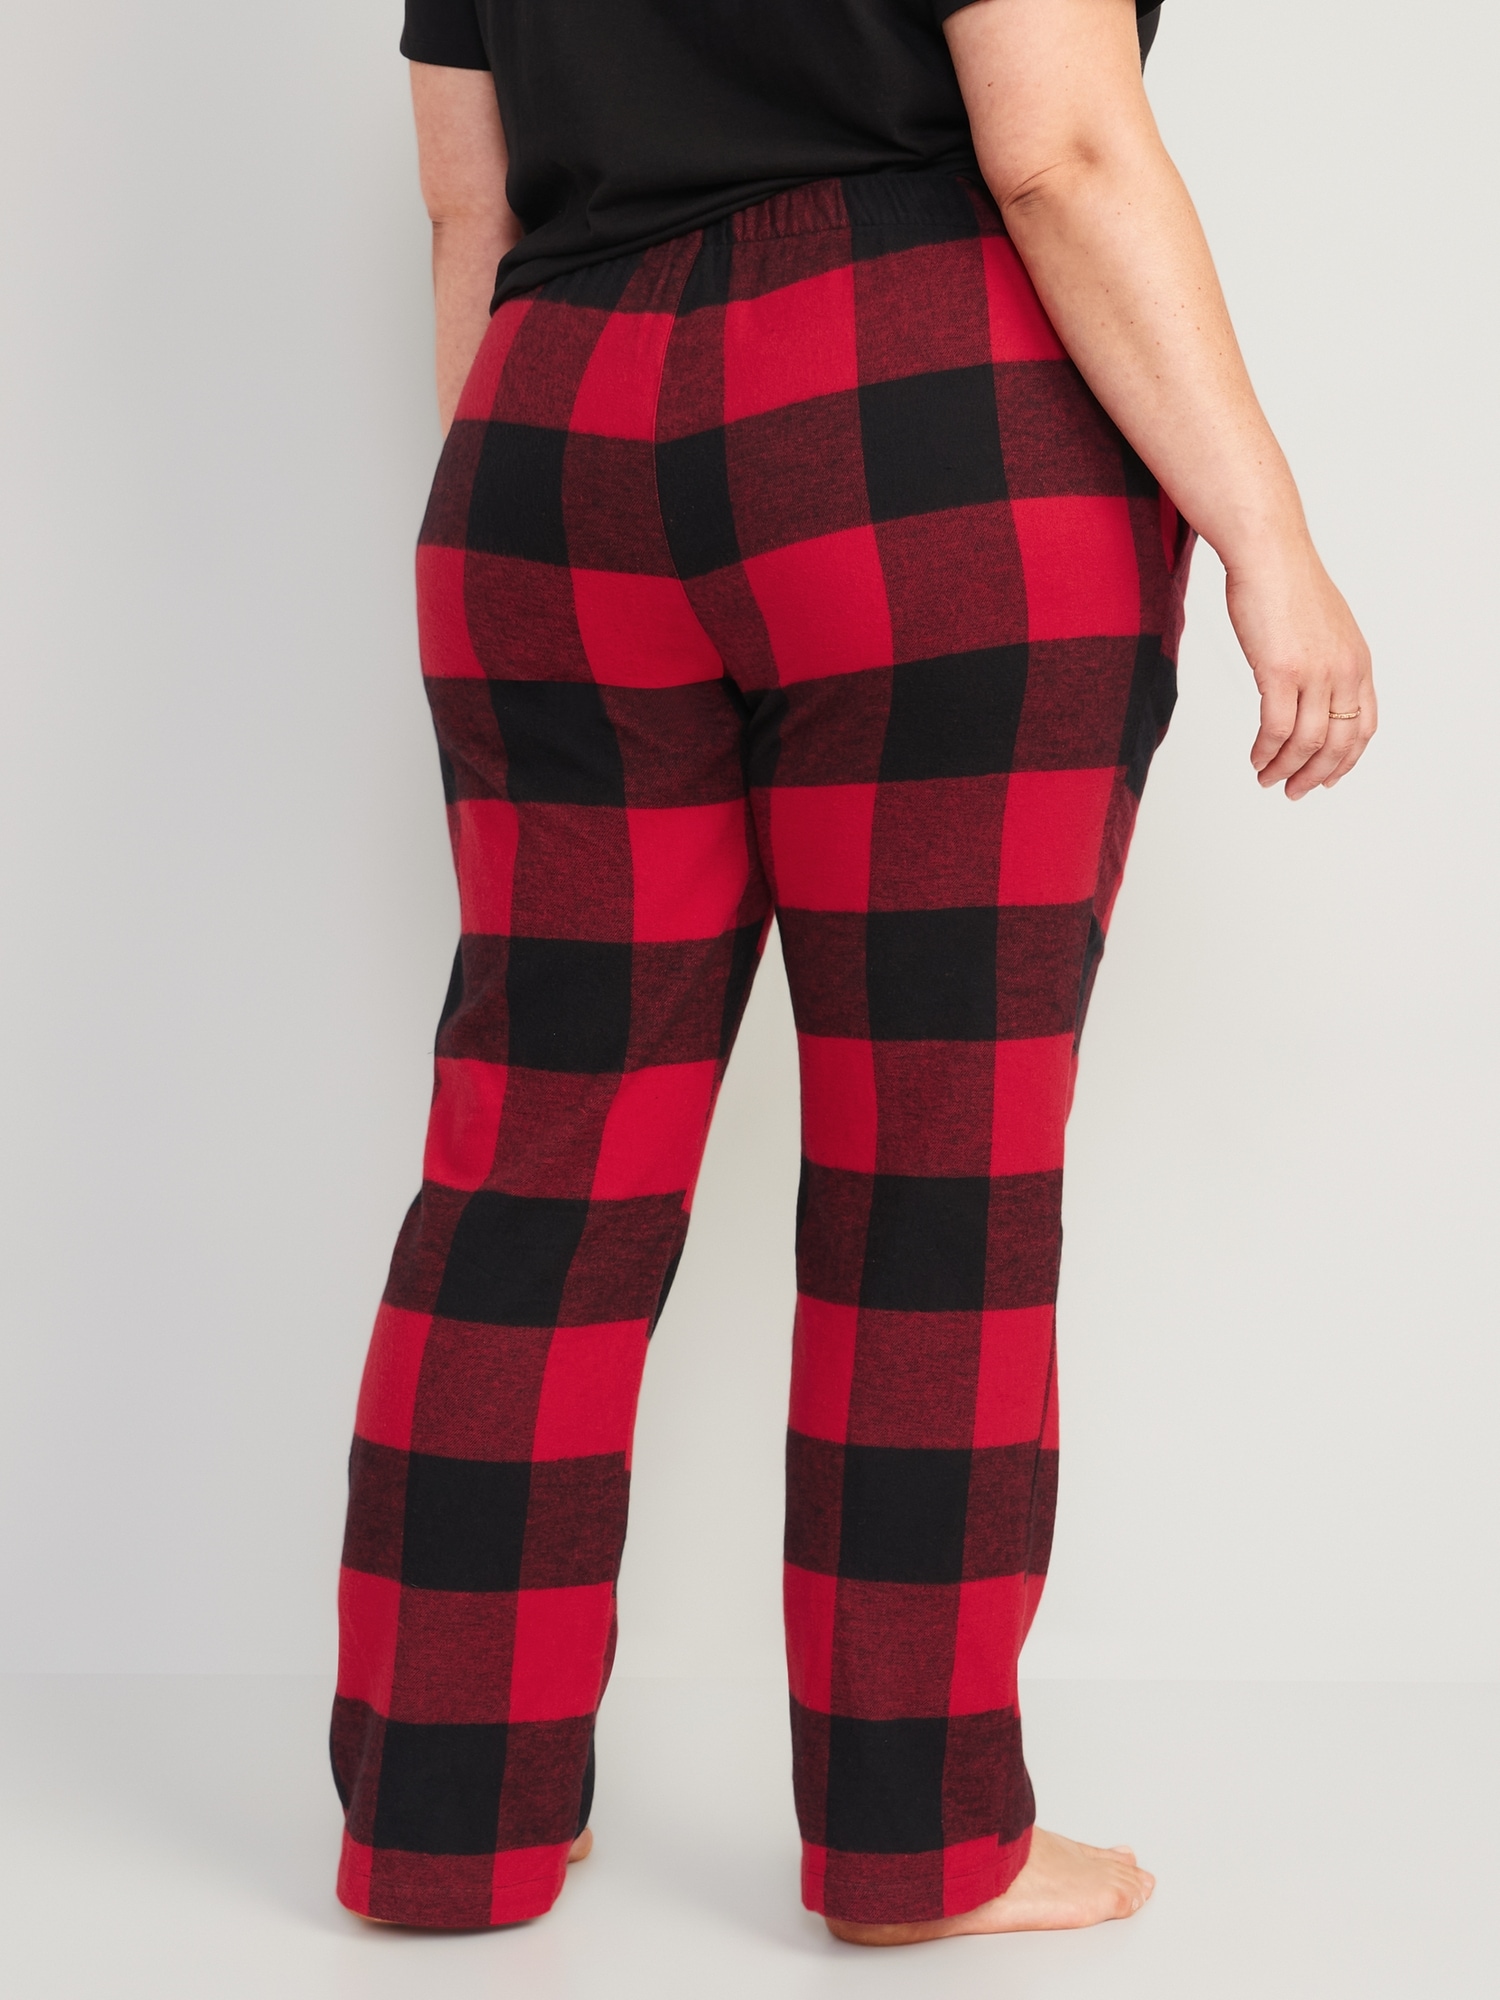 Old Navy 100% Cotton Pajama Pants for Women